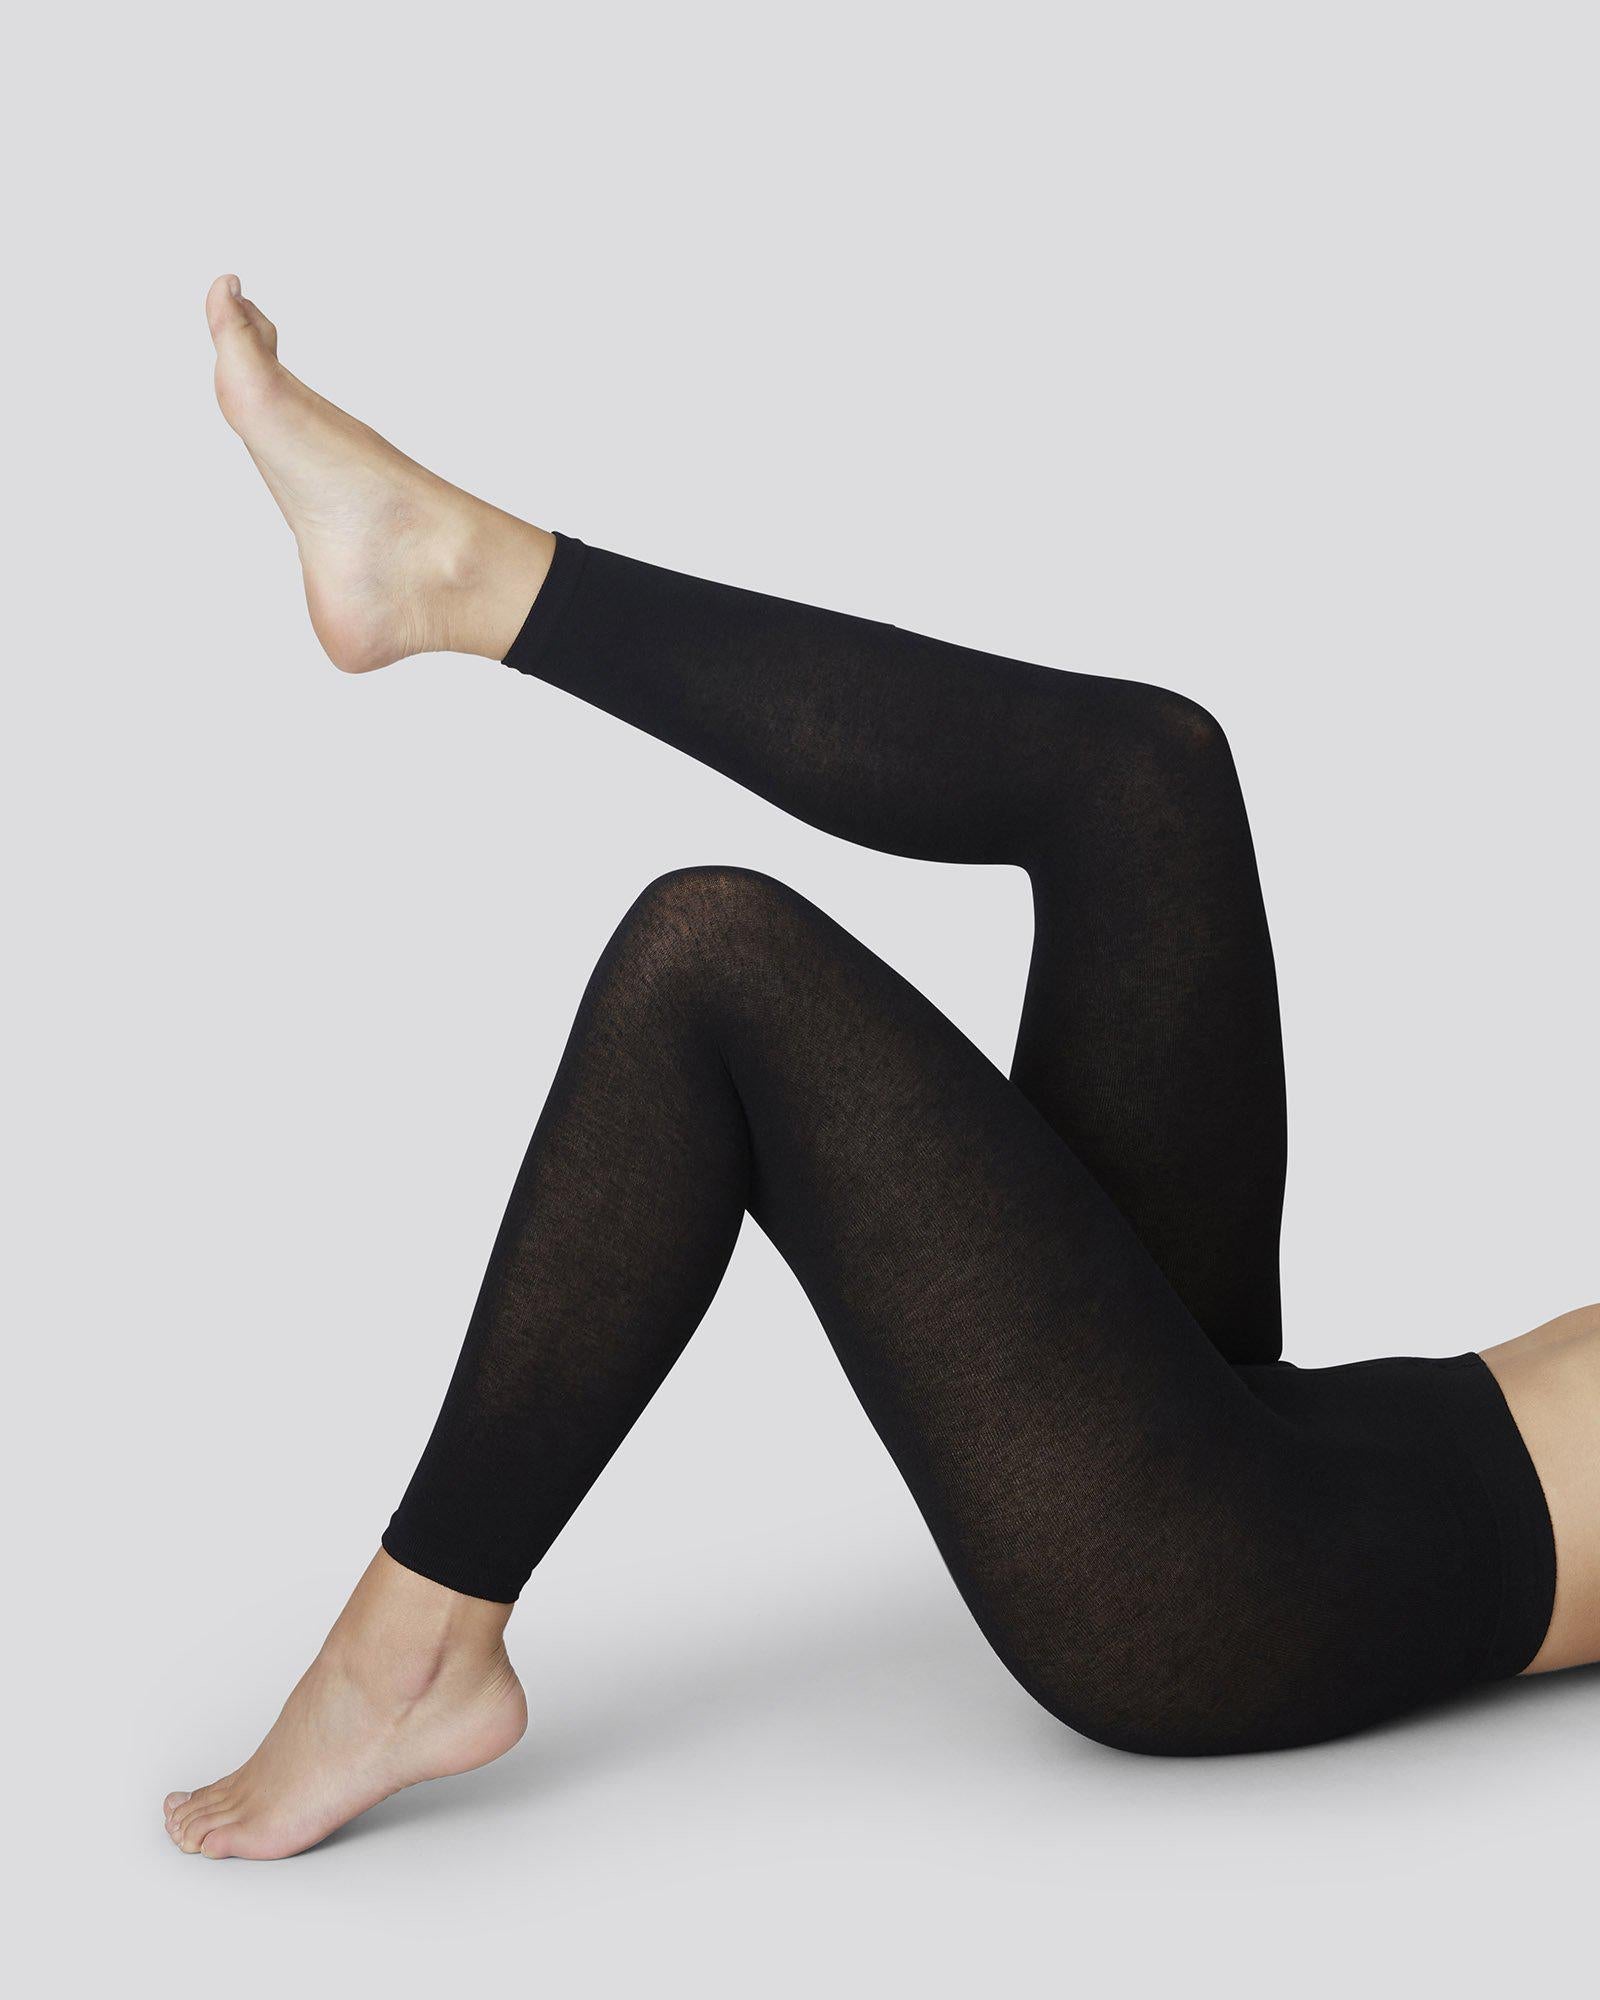 Discover more than 128 stockings or leggings